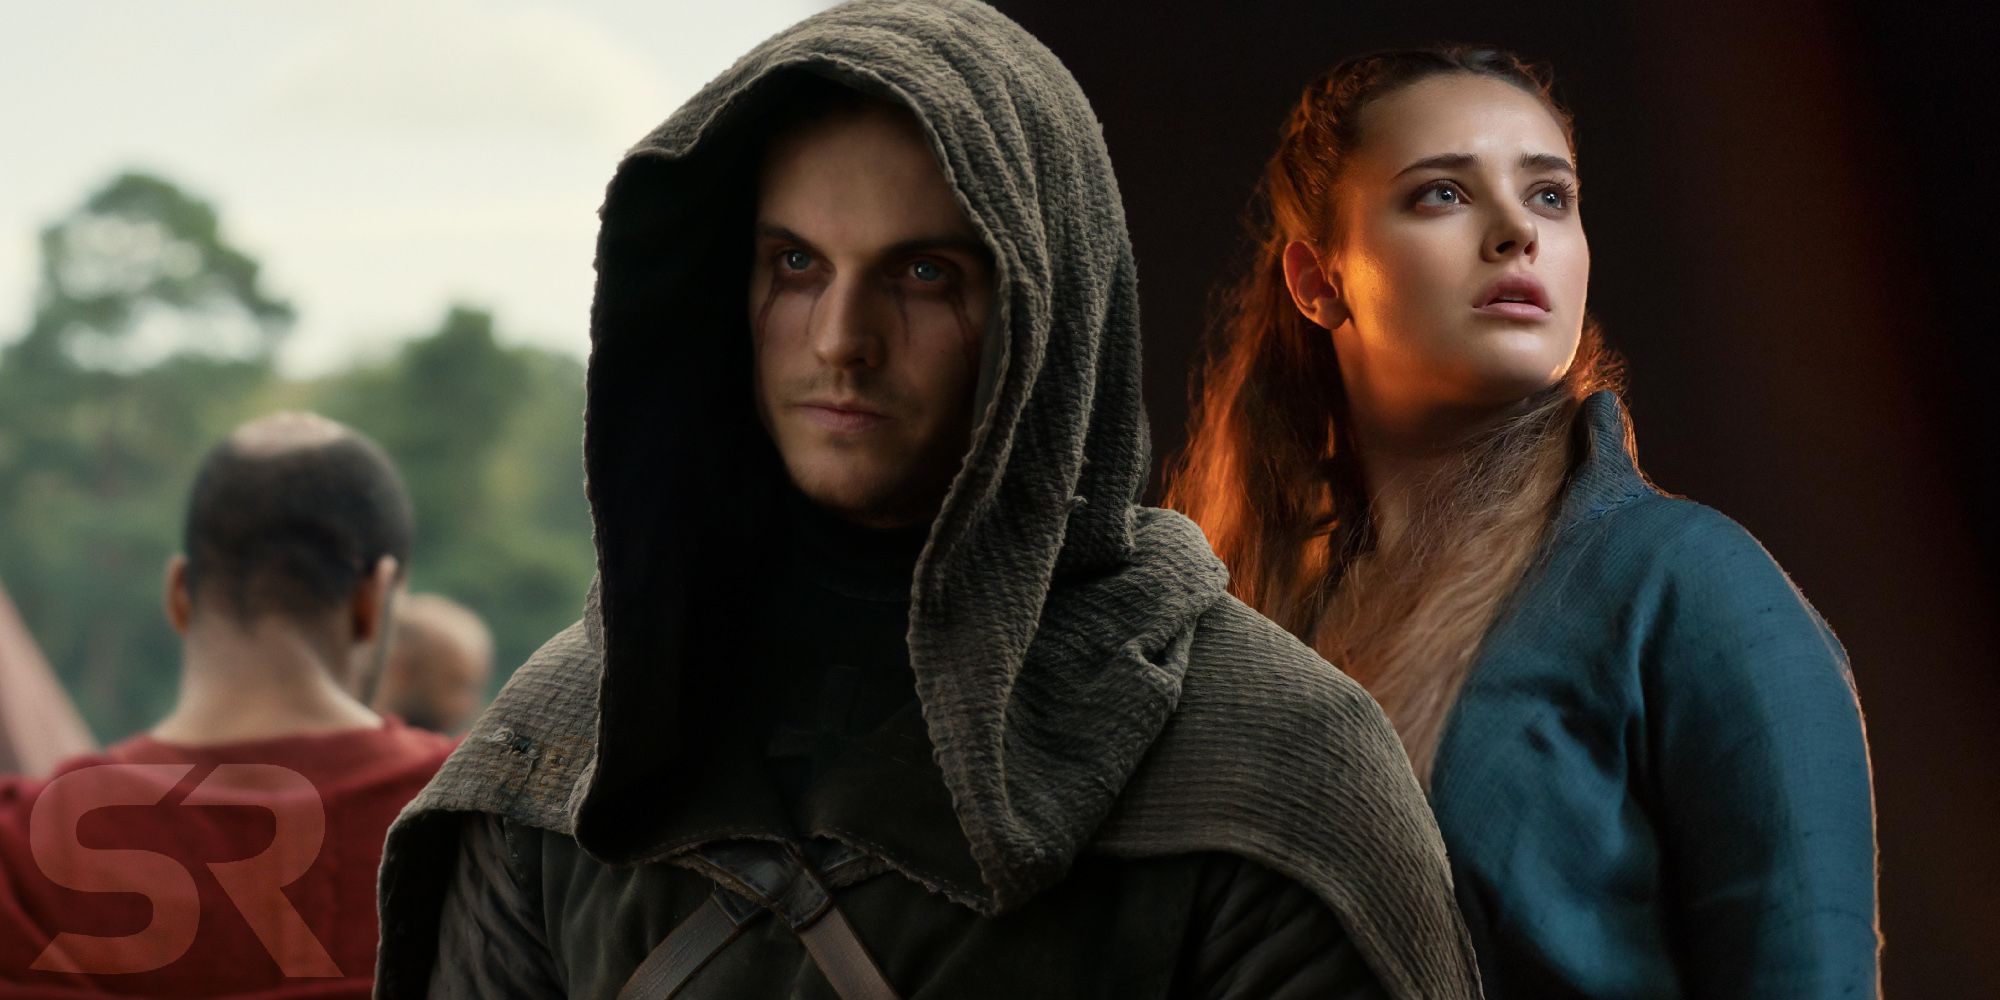 Cursed Season 2: Why Nimue And Lancelot Should Get Together